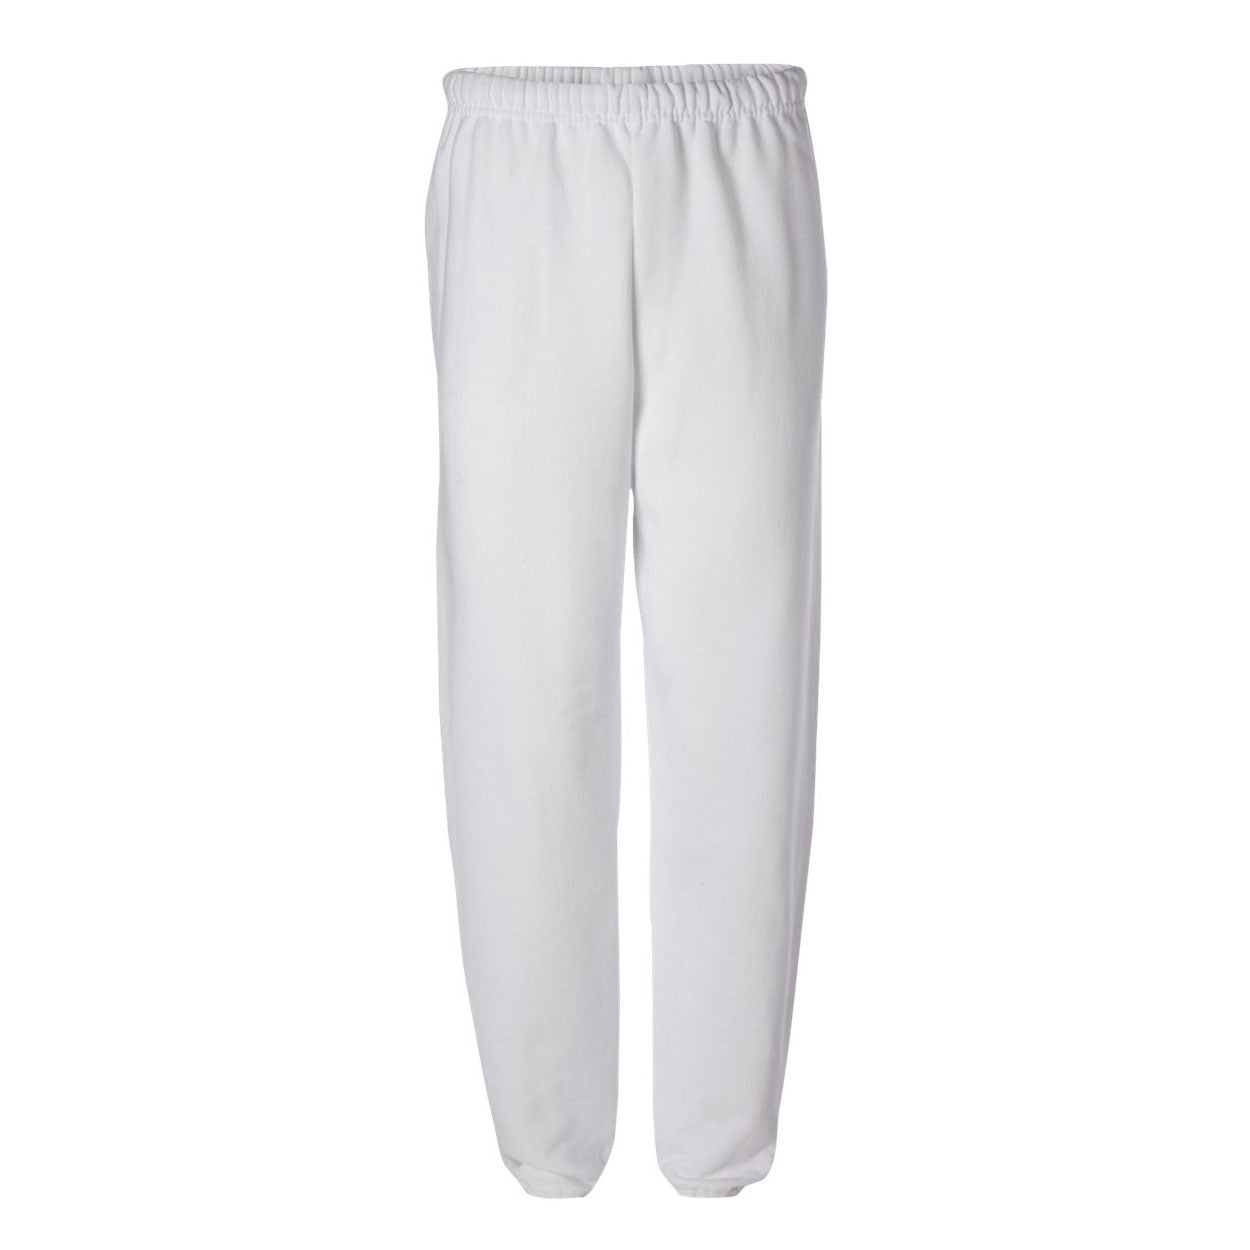 Unbeatable quality and durability with our Sweatpants Fruit 973MR ...